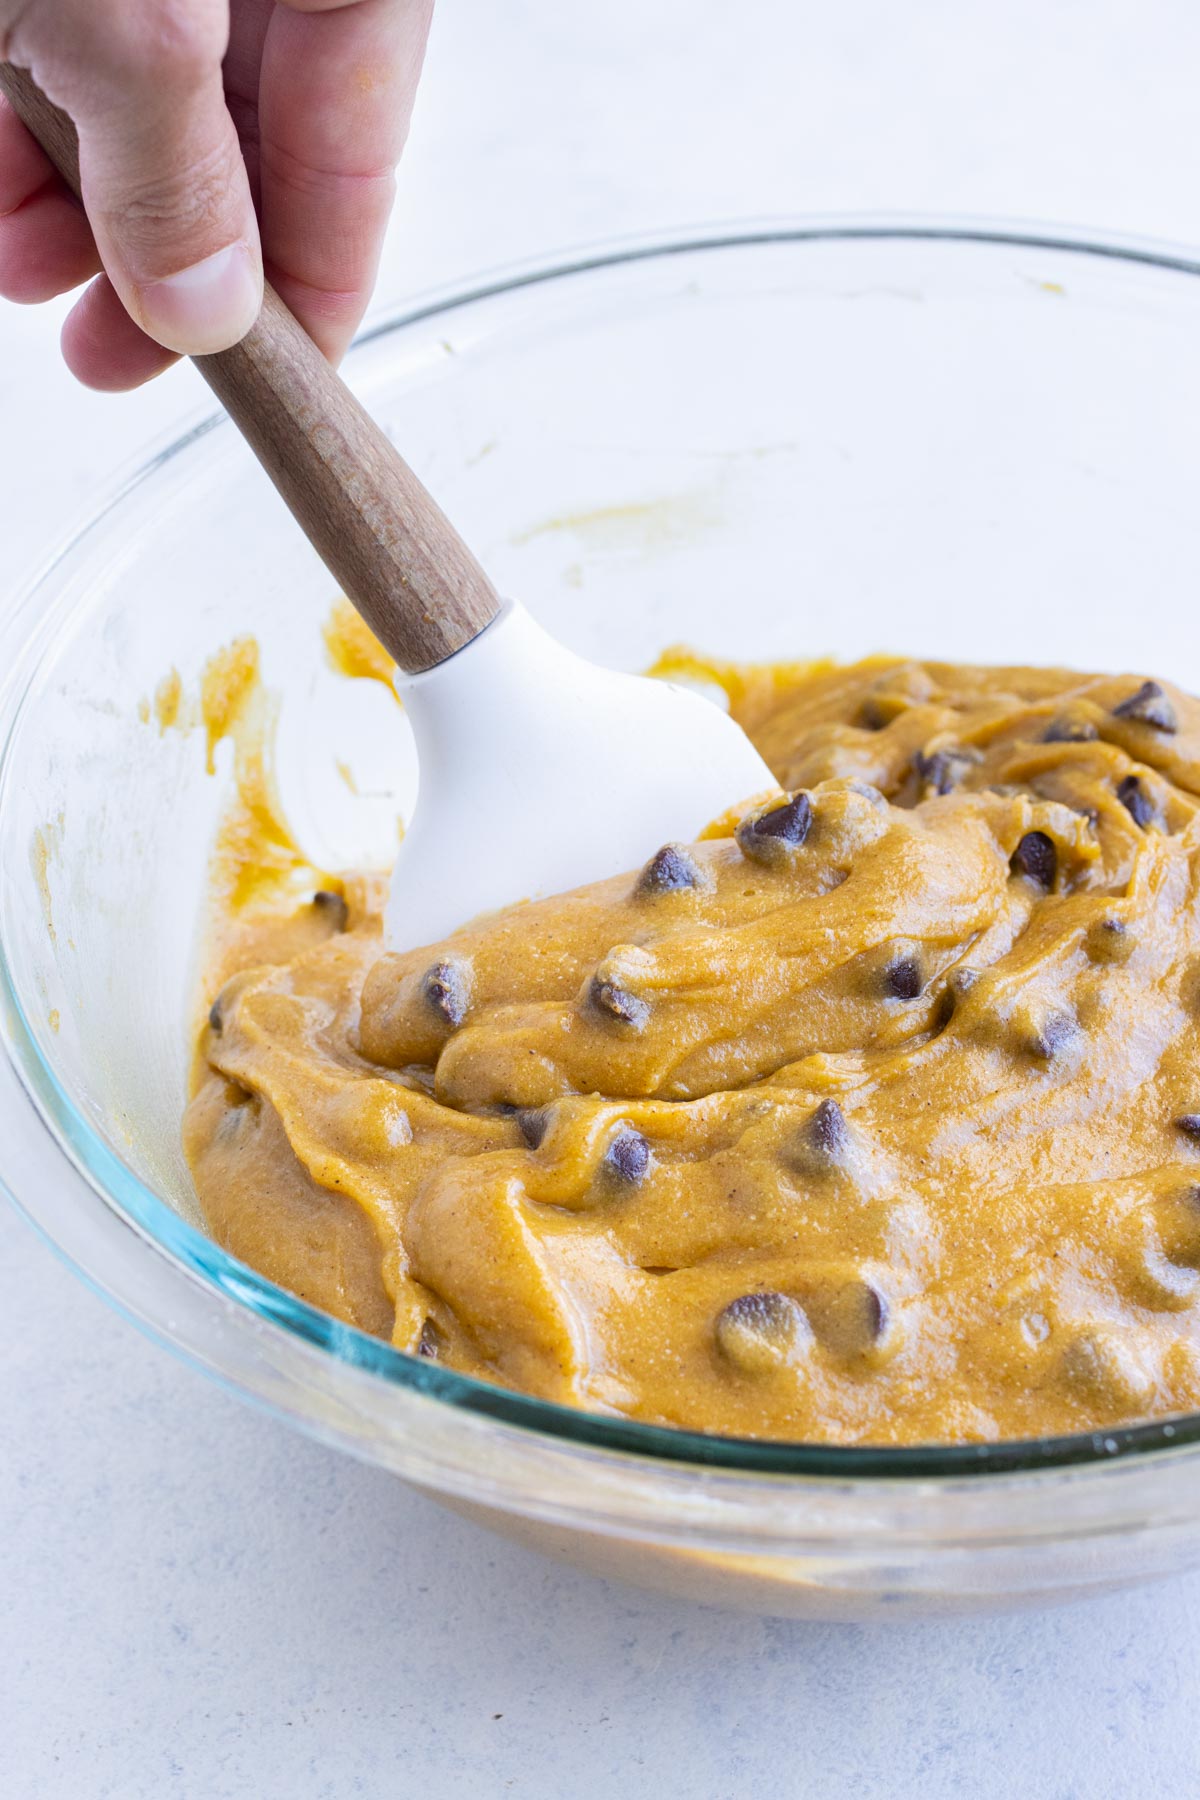 Chocolate chips are added to the batter.